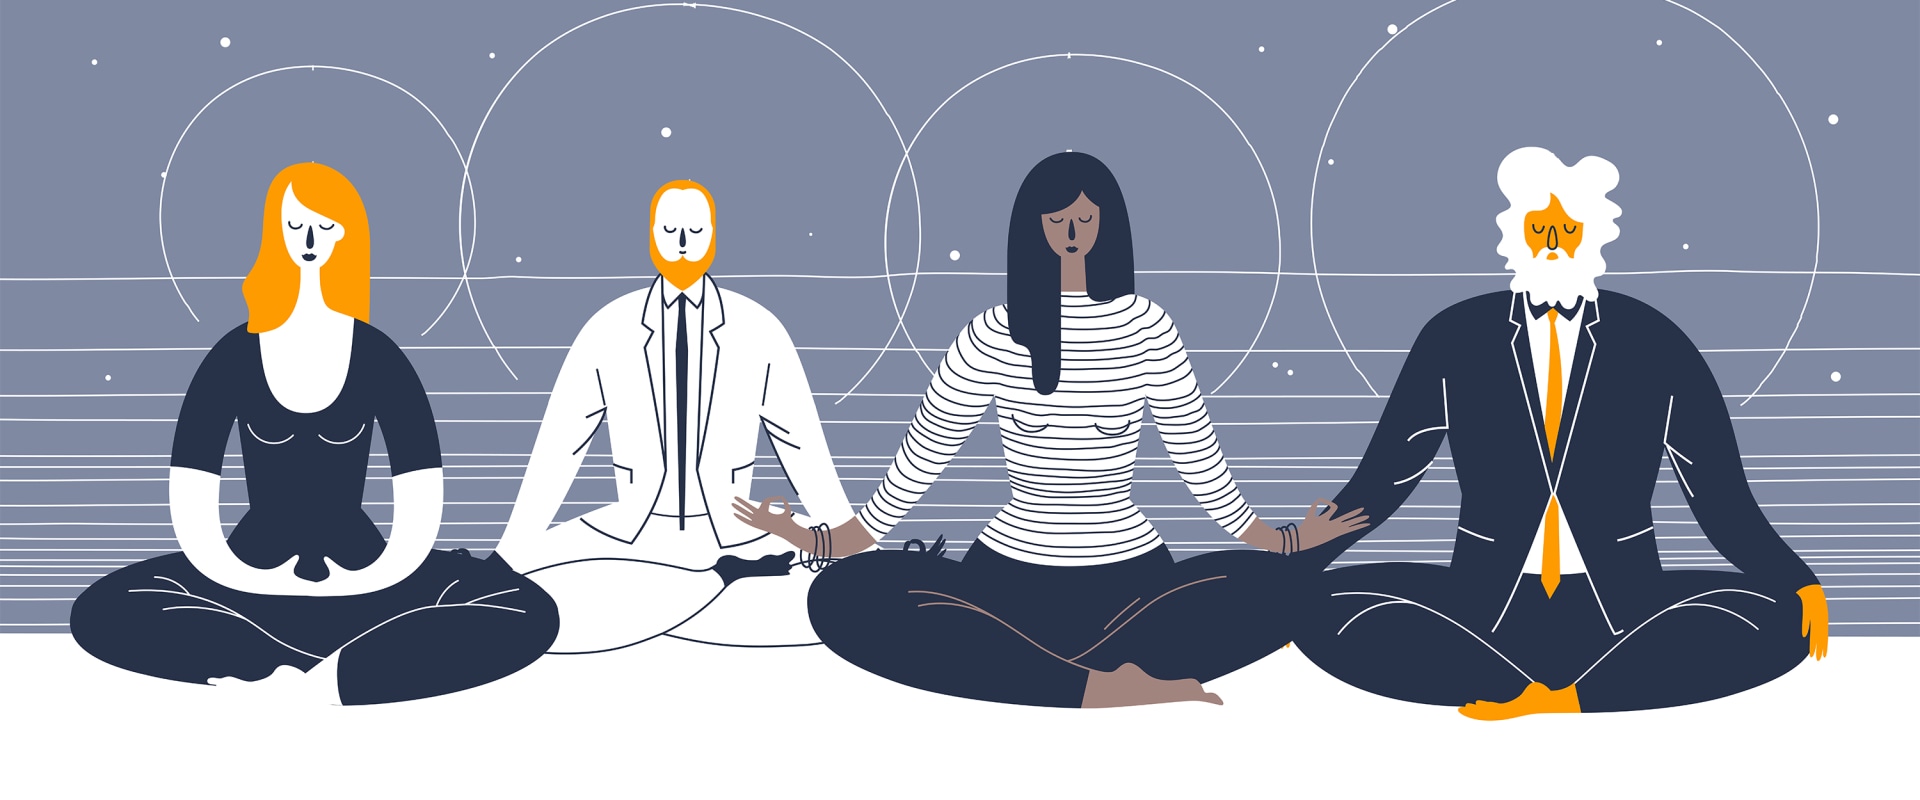 Can You Teach Yourself Mindfulness?